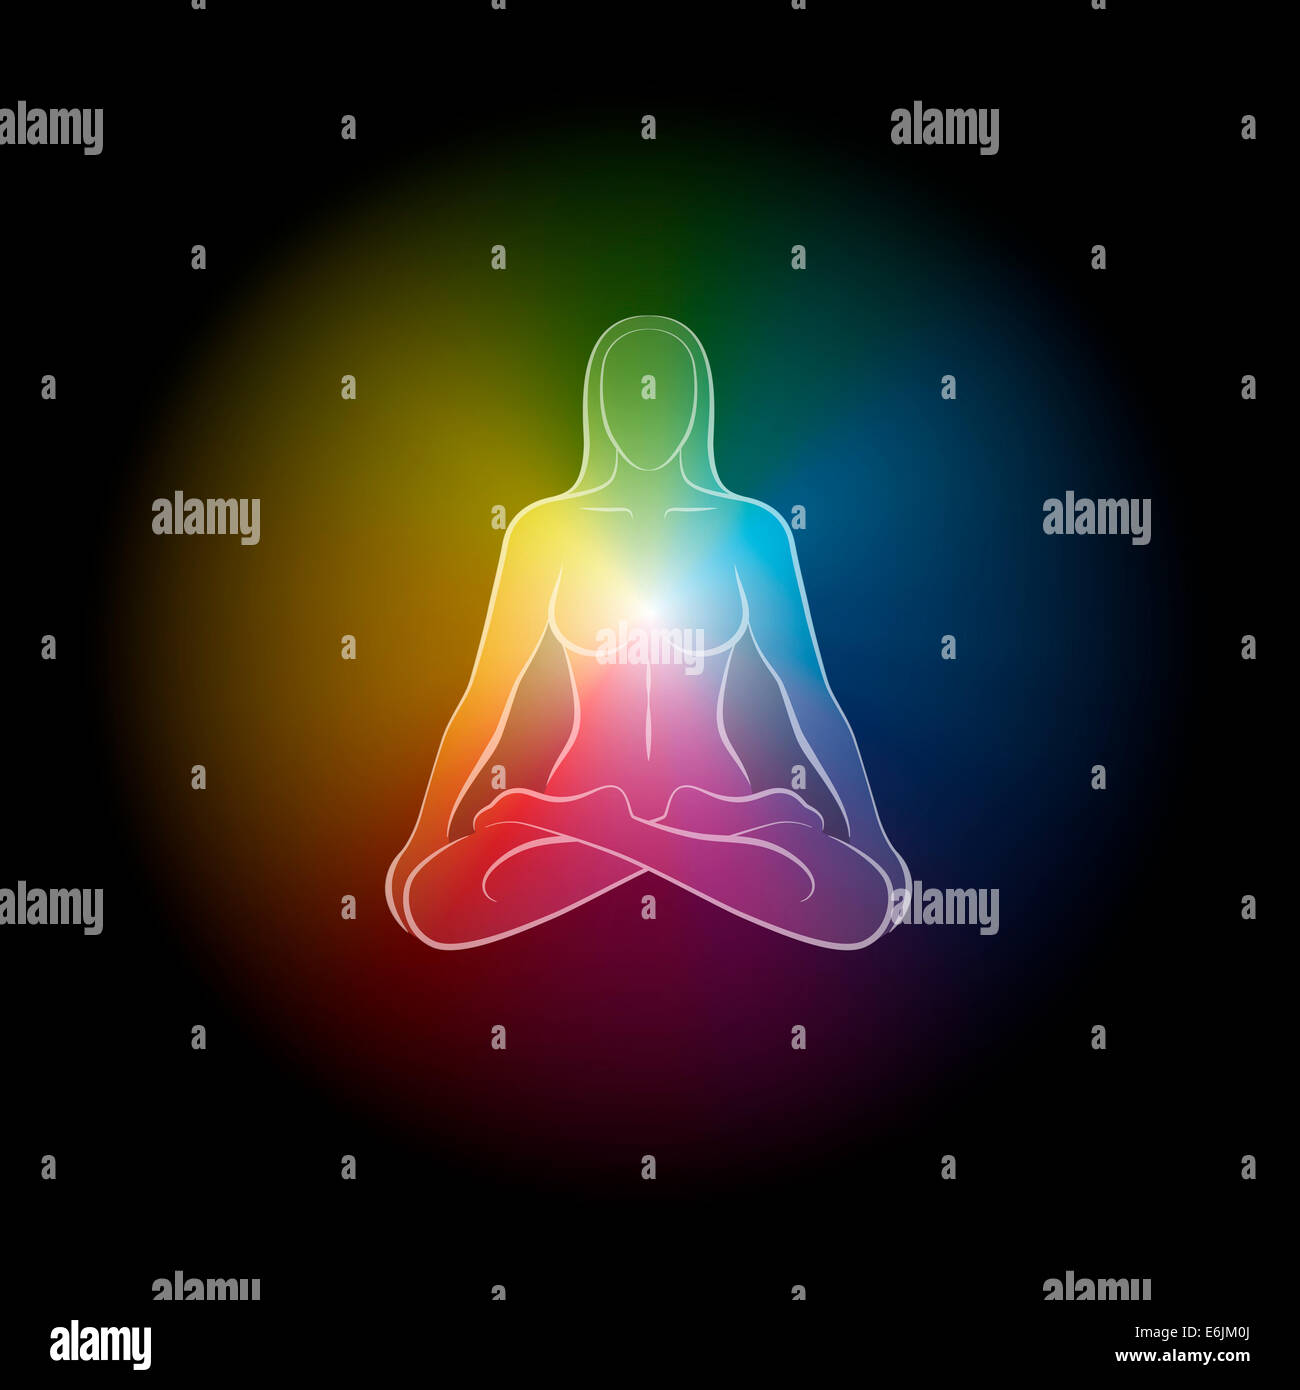 Colorful mystical aura of a meditating woman in yoga position. Stock Photo